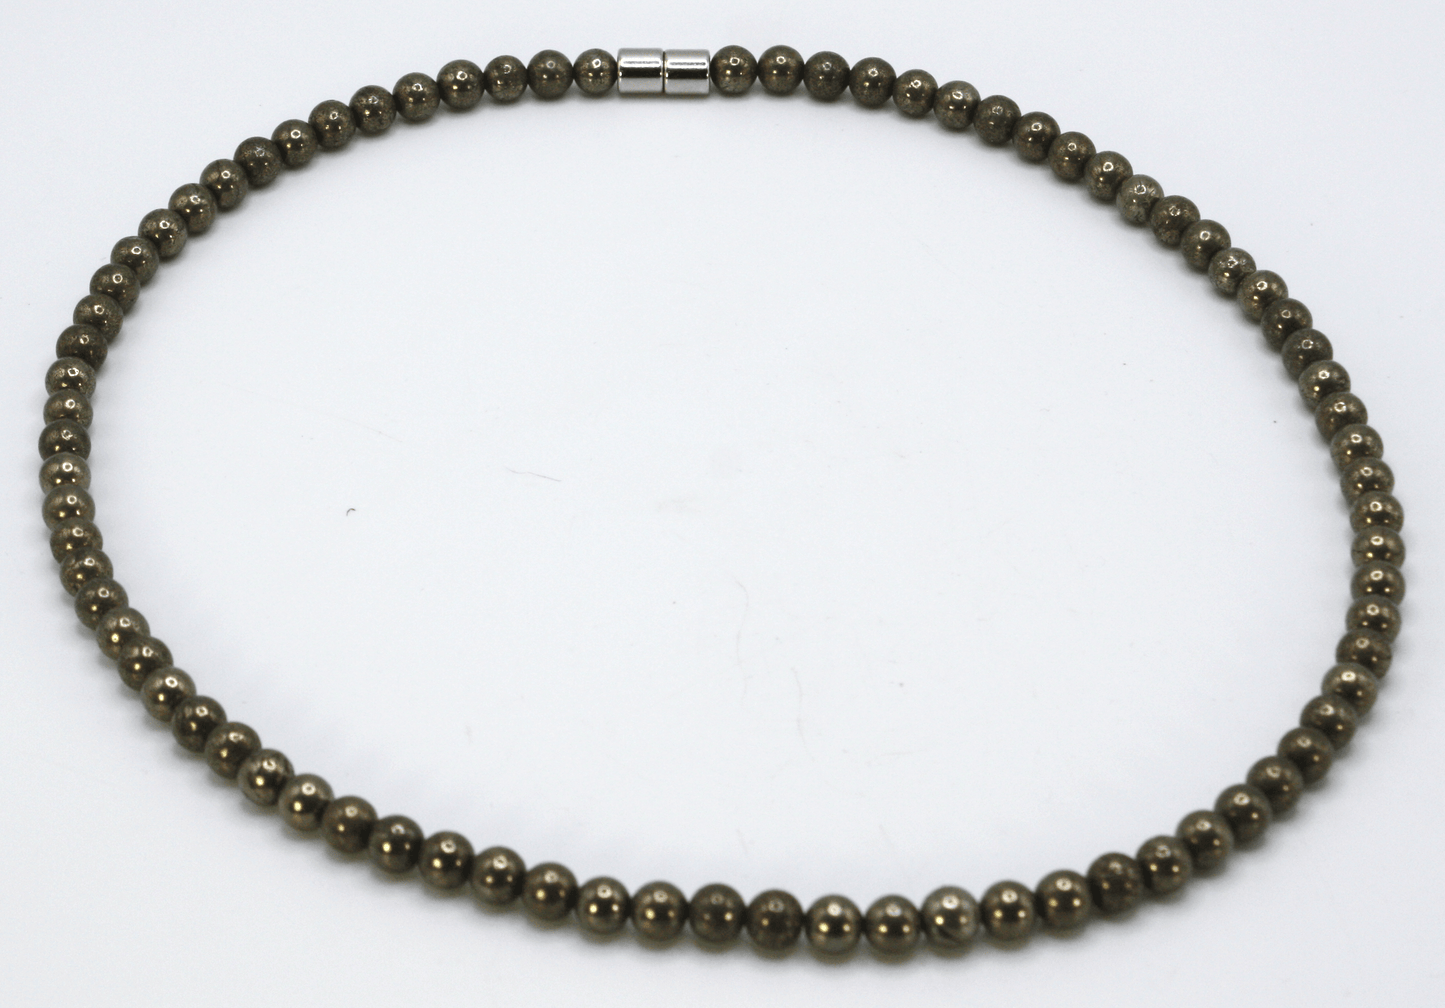 Genuine Pyrite Necklace - Gifts for Men/Women - 6mm Bead Diameter - Prosperity Jewelry - Protection Stone